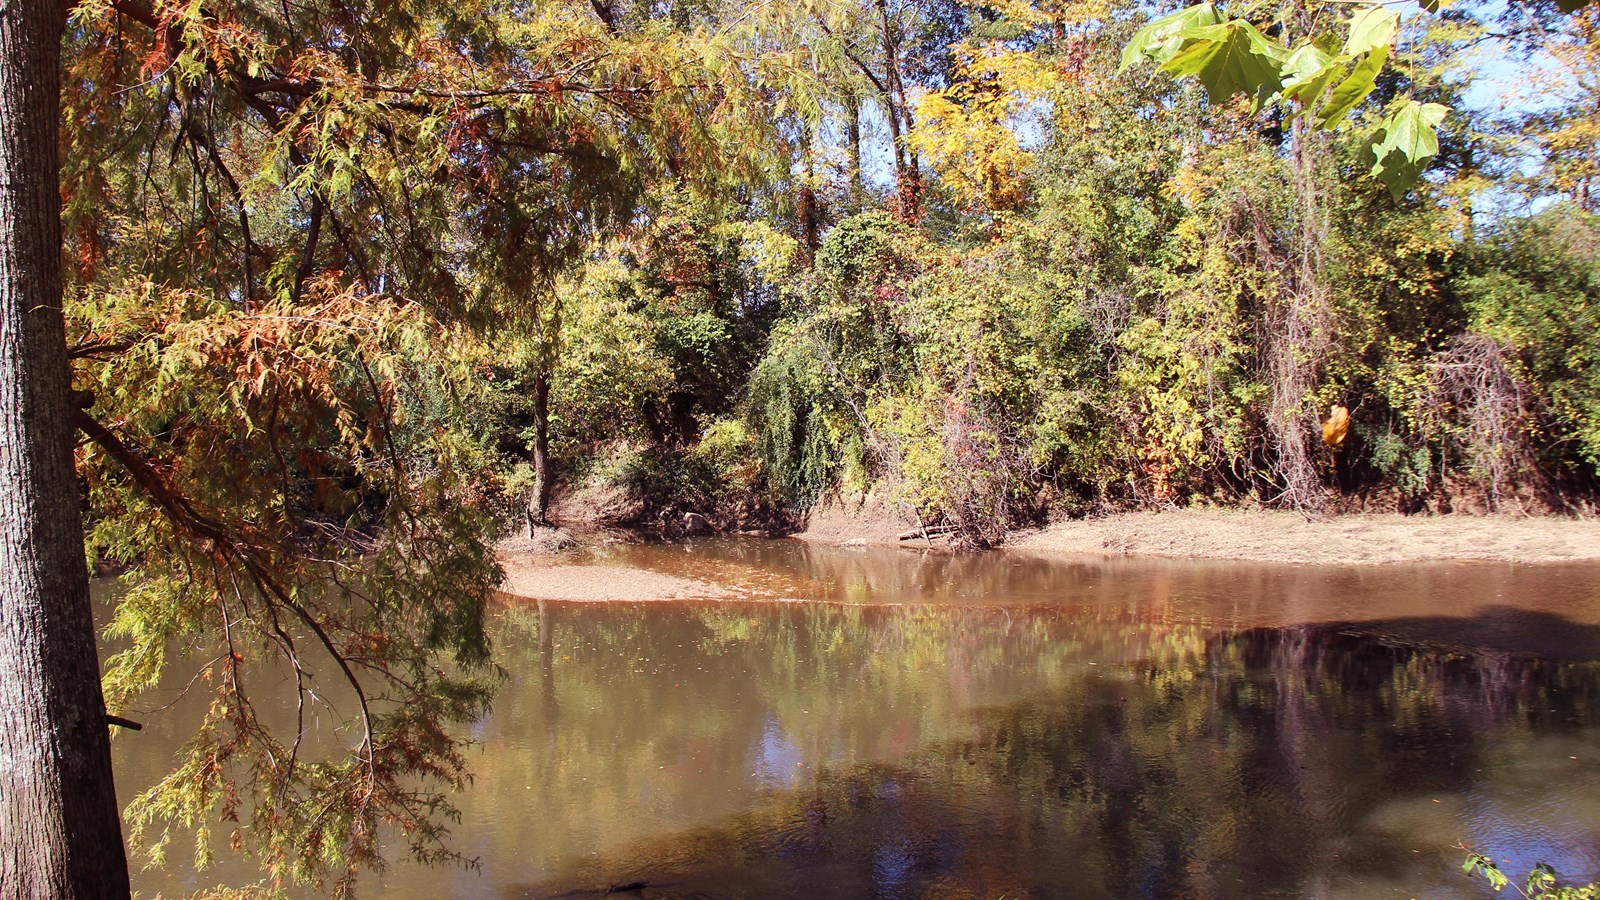 A glassy surfaced wide creek with trees on the opposite bank.